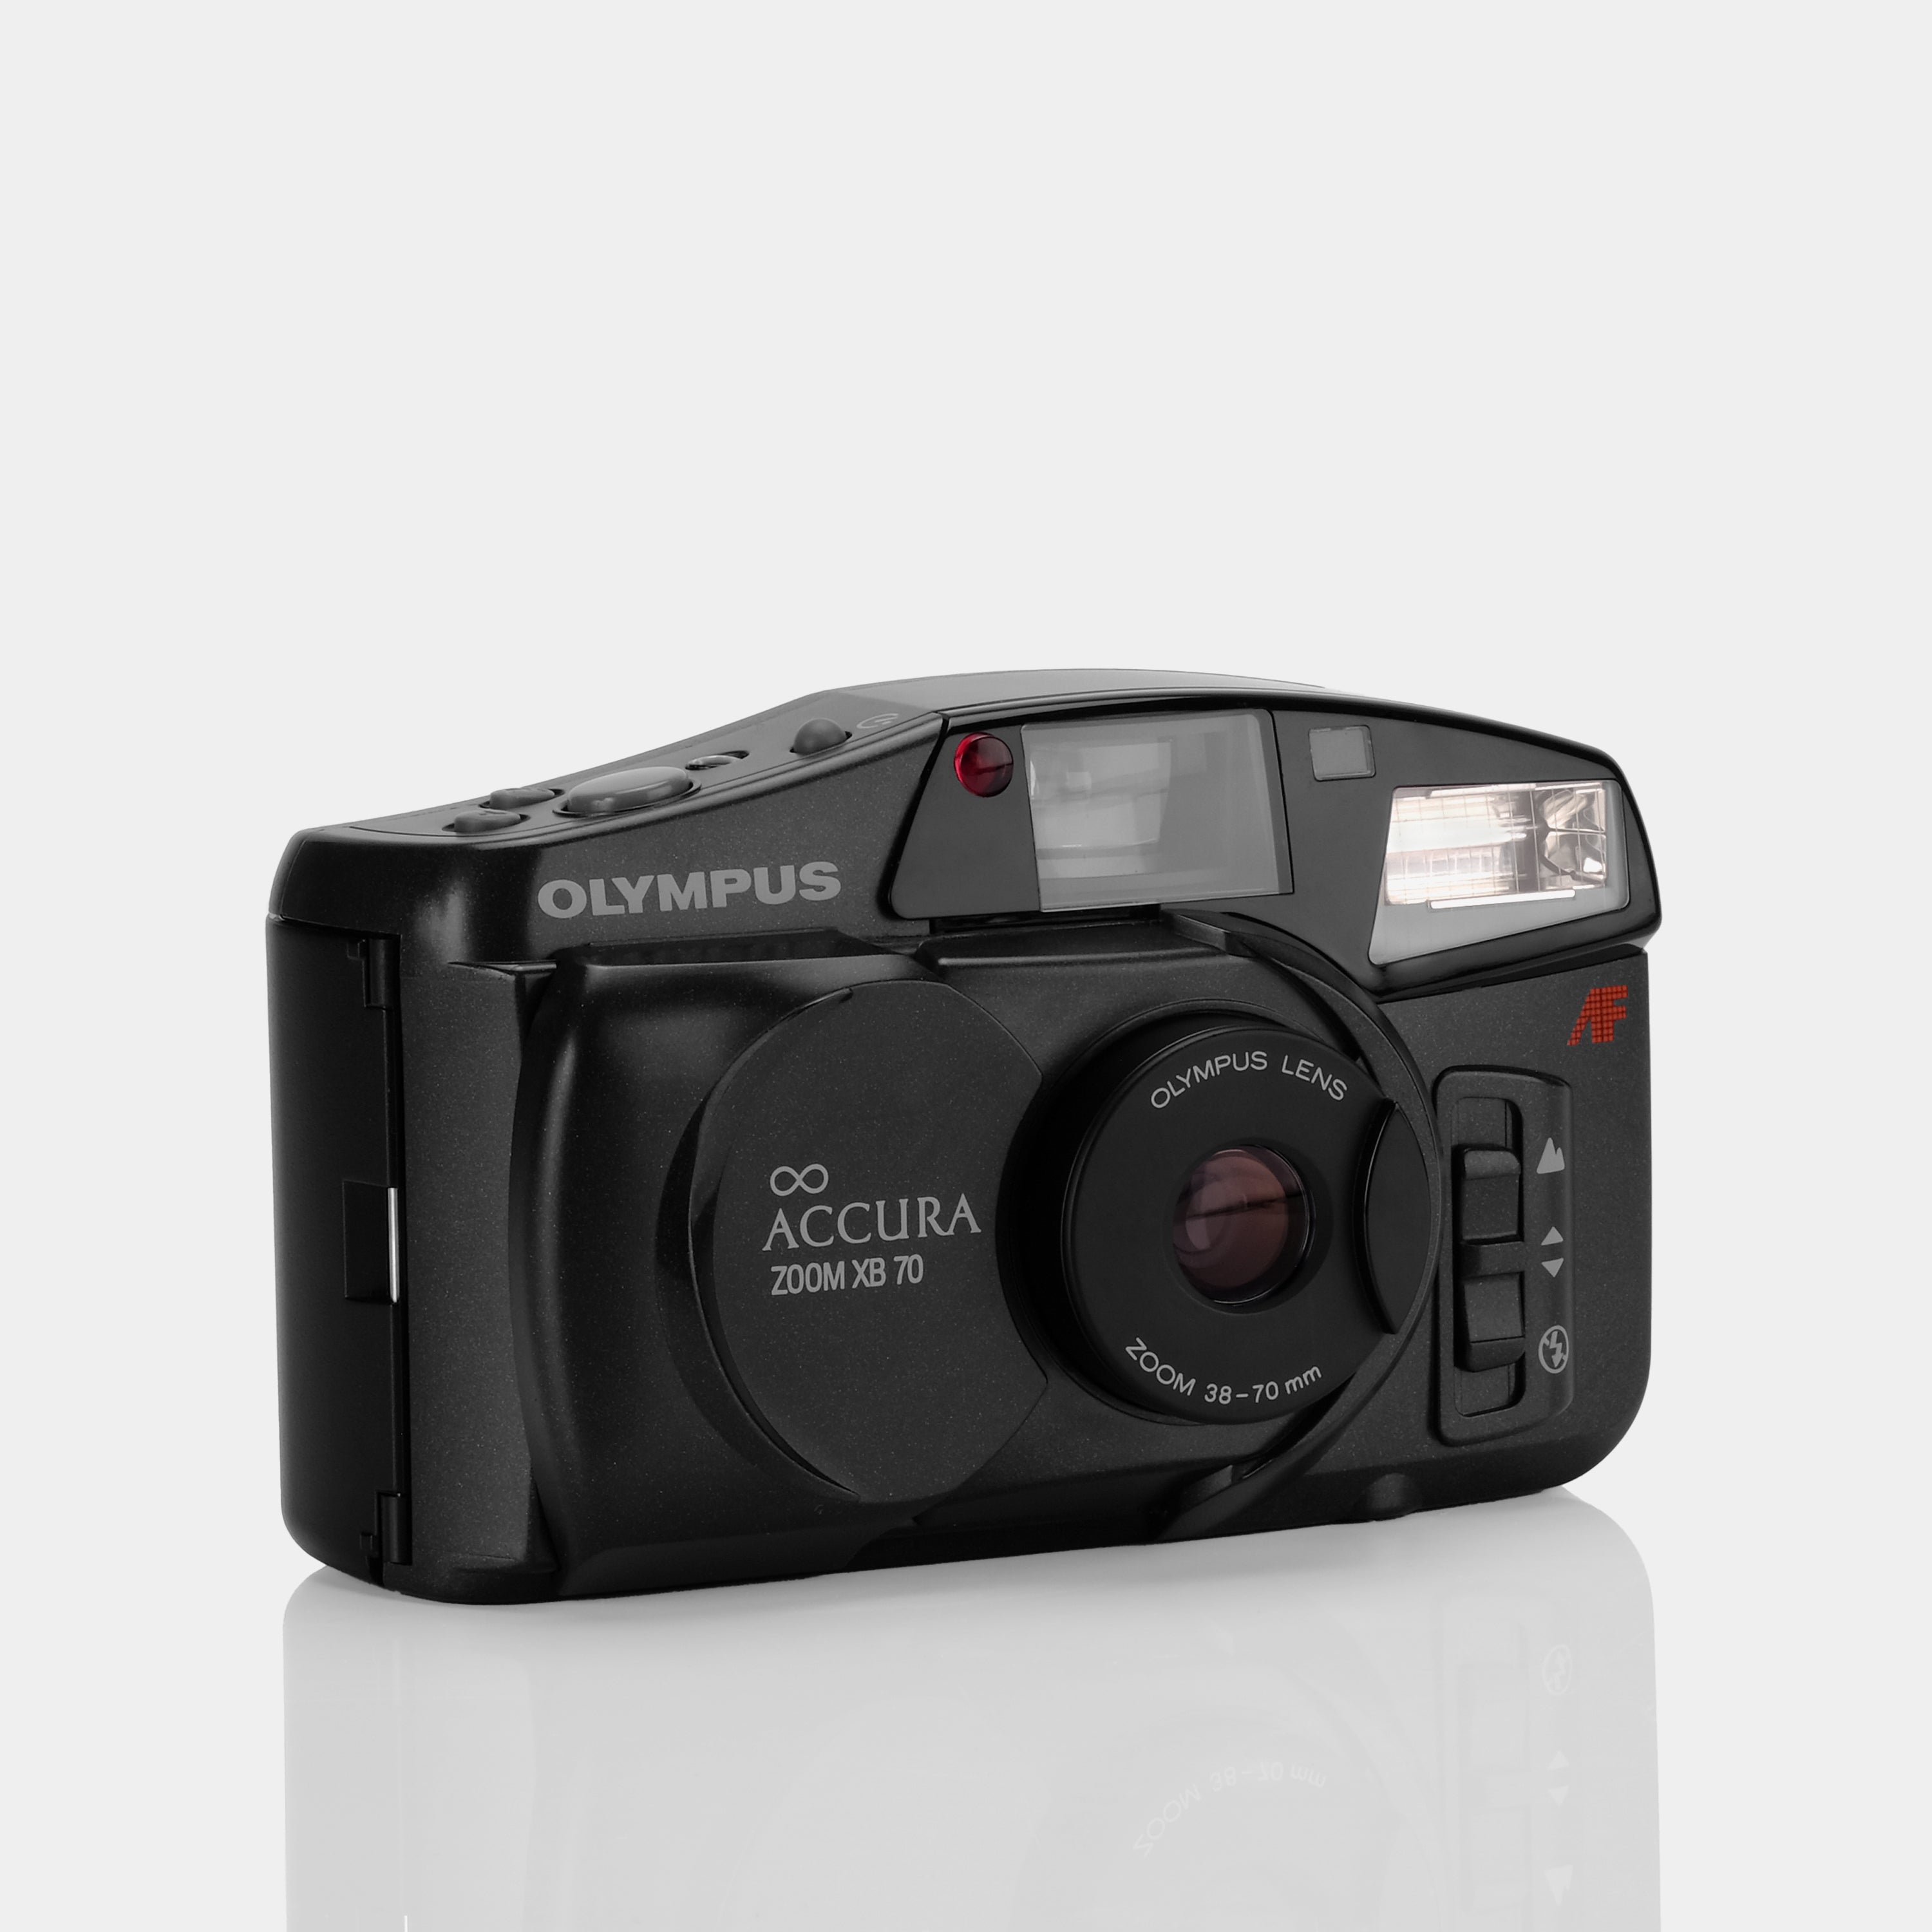 Olympus ∞ Accura Zoom XB 70 35mm Point and Shoot Film Camera